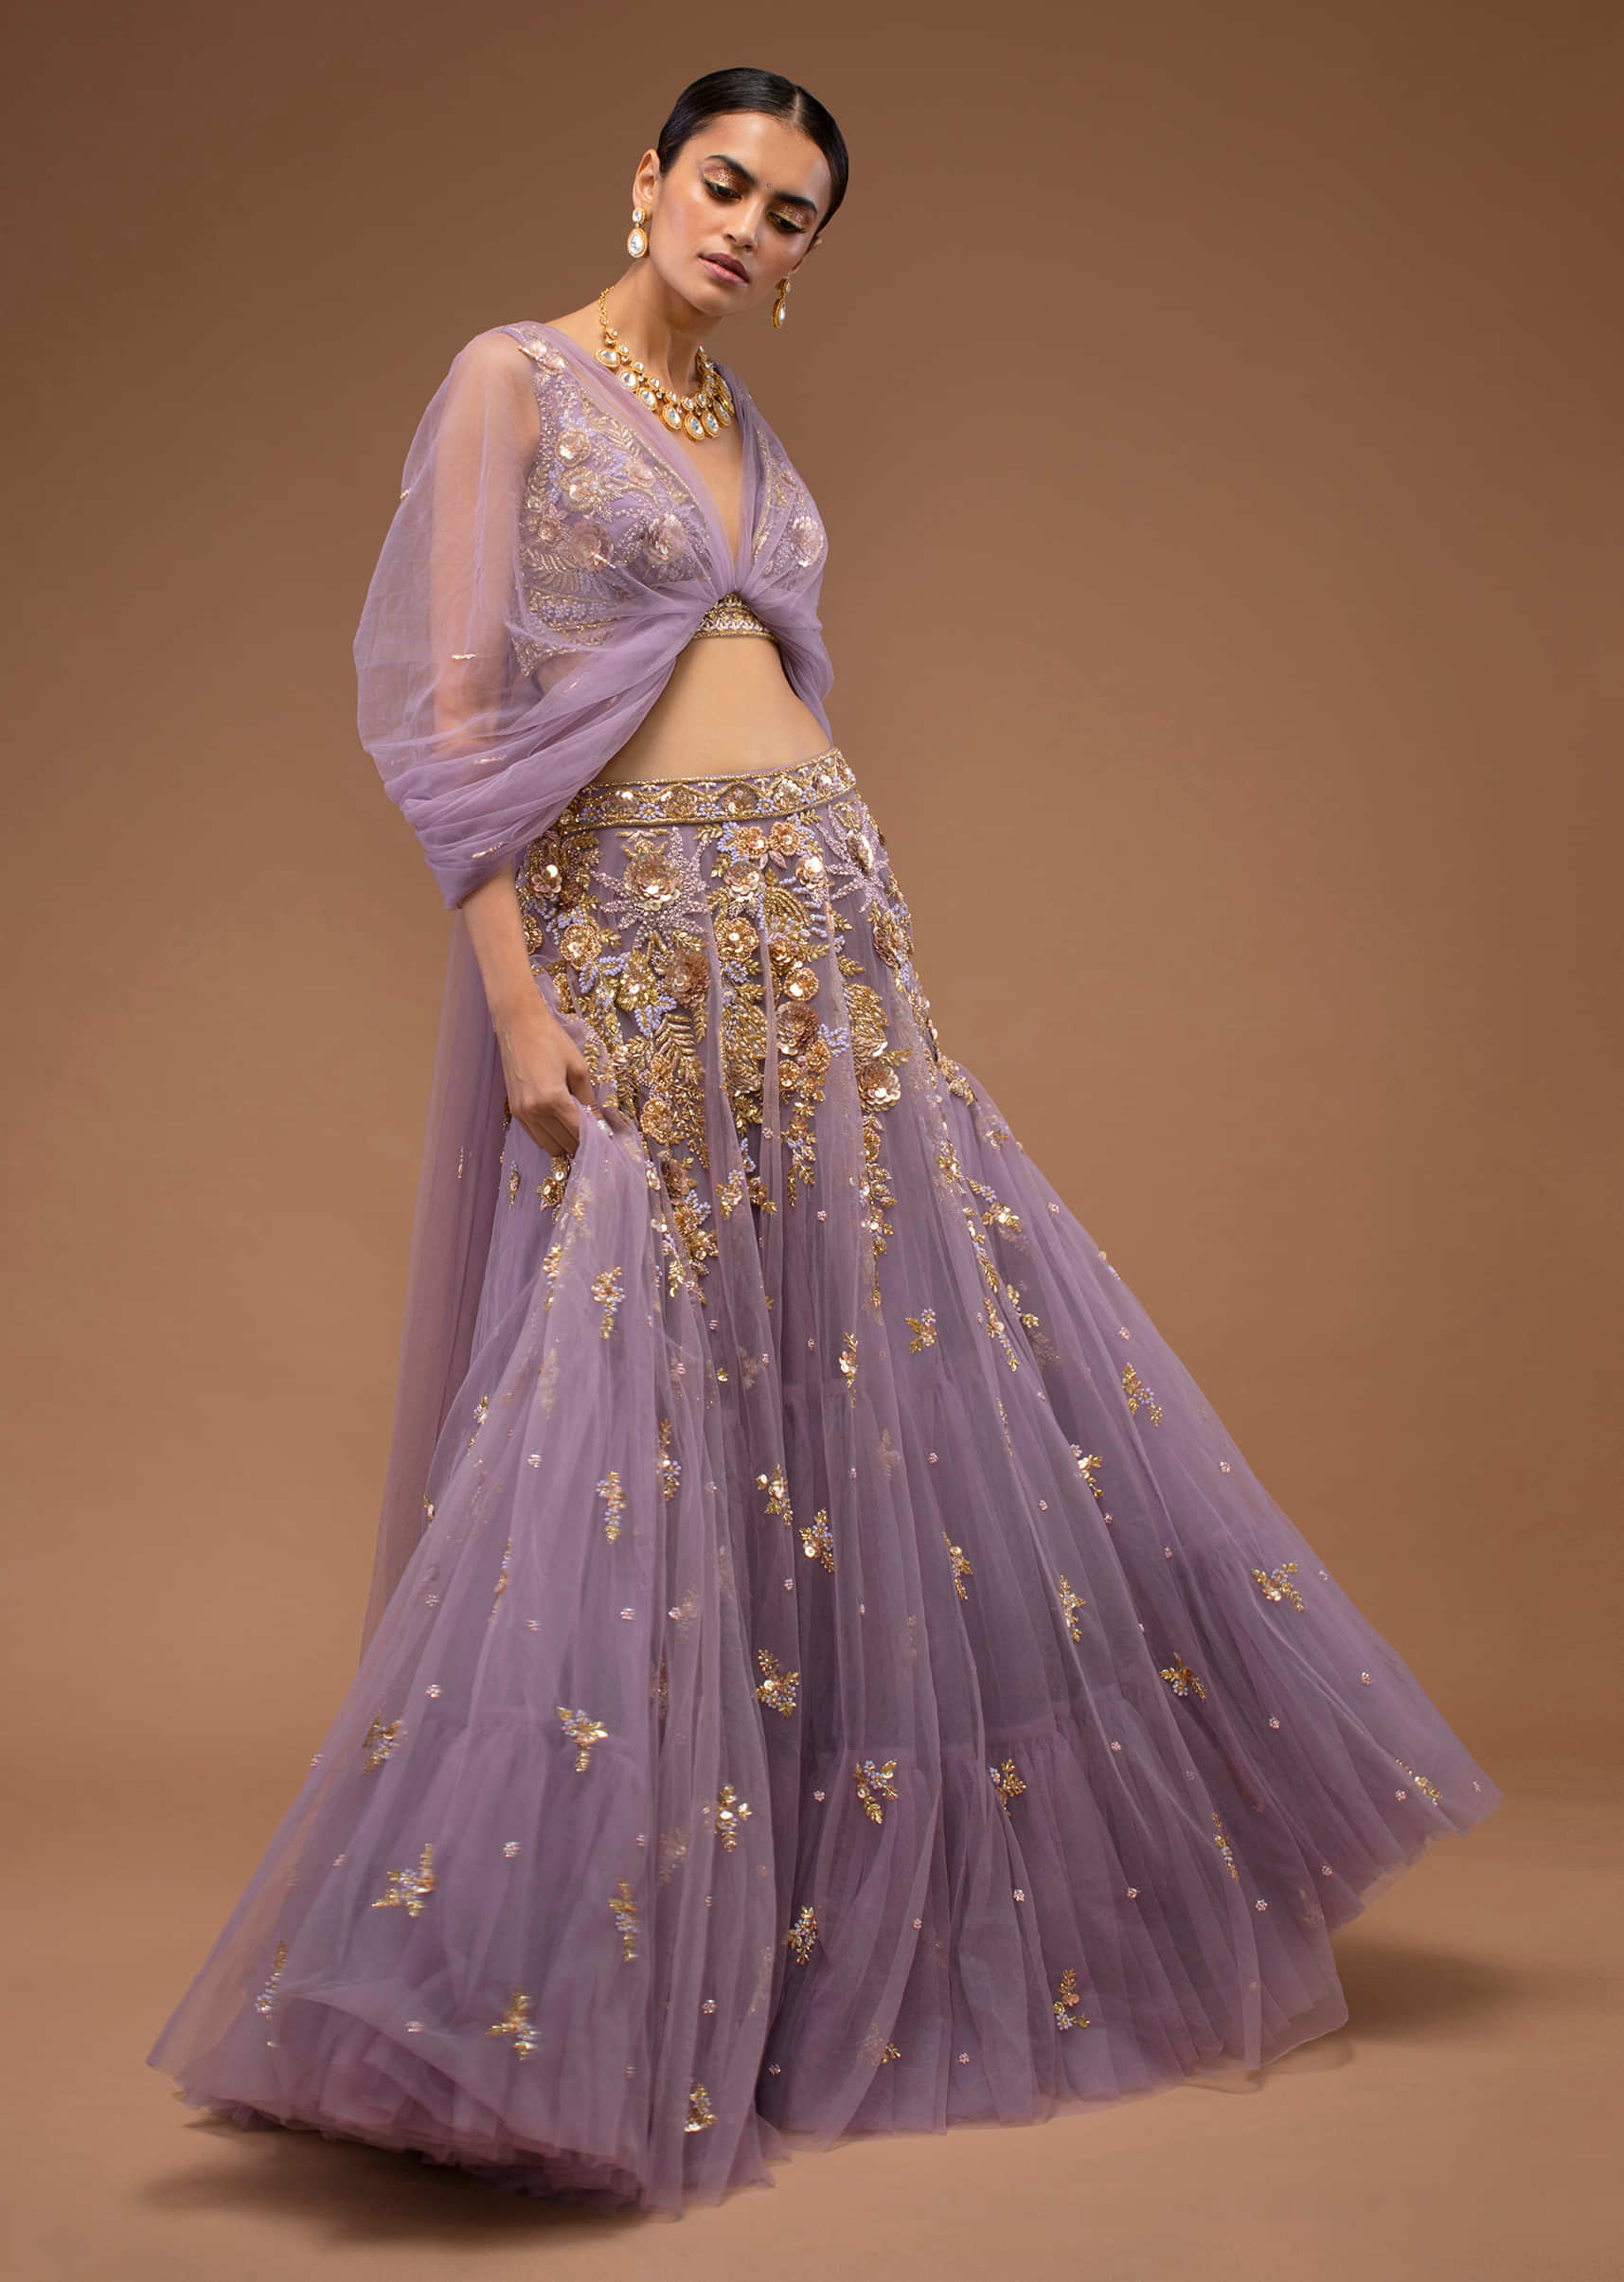 Shivani Singh In Kalki Lavender Skirt And Blouse With A Three Way Fancy Drape And Hand Embroidery